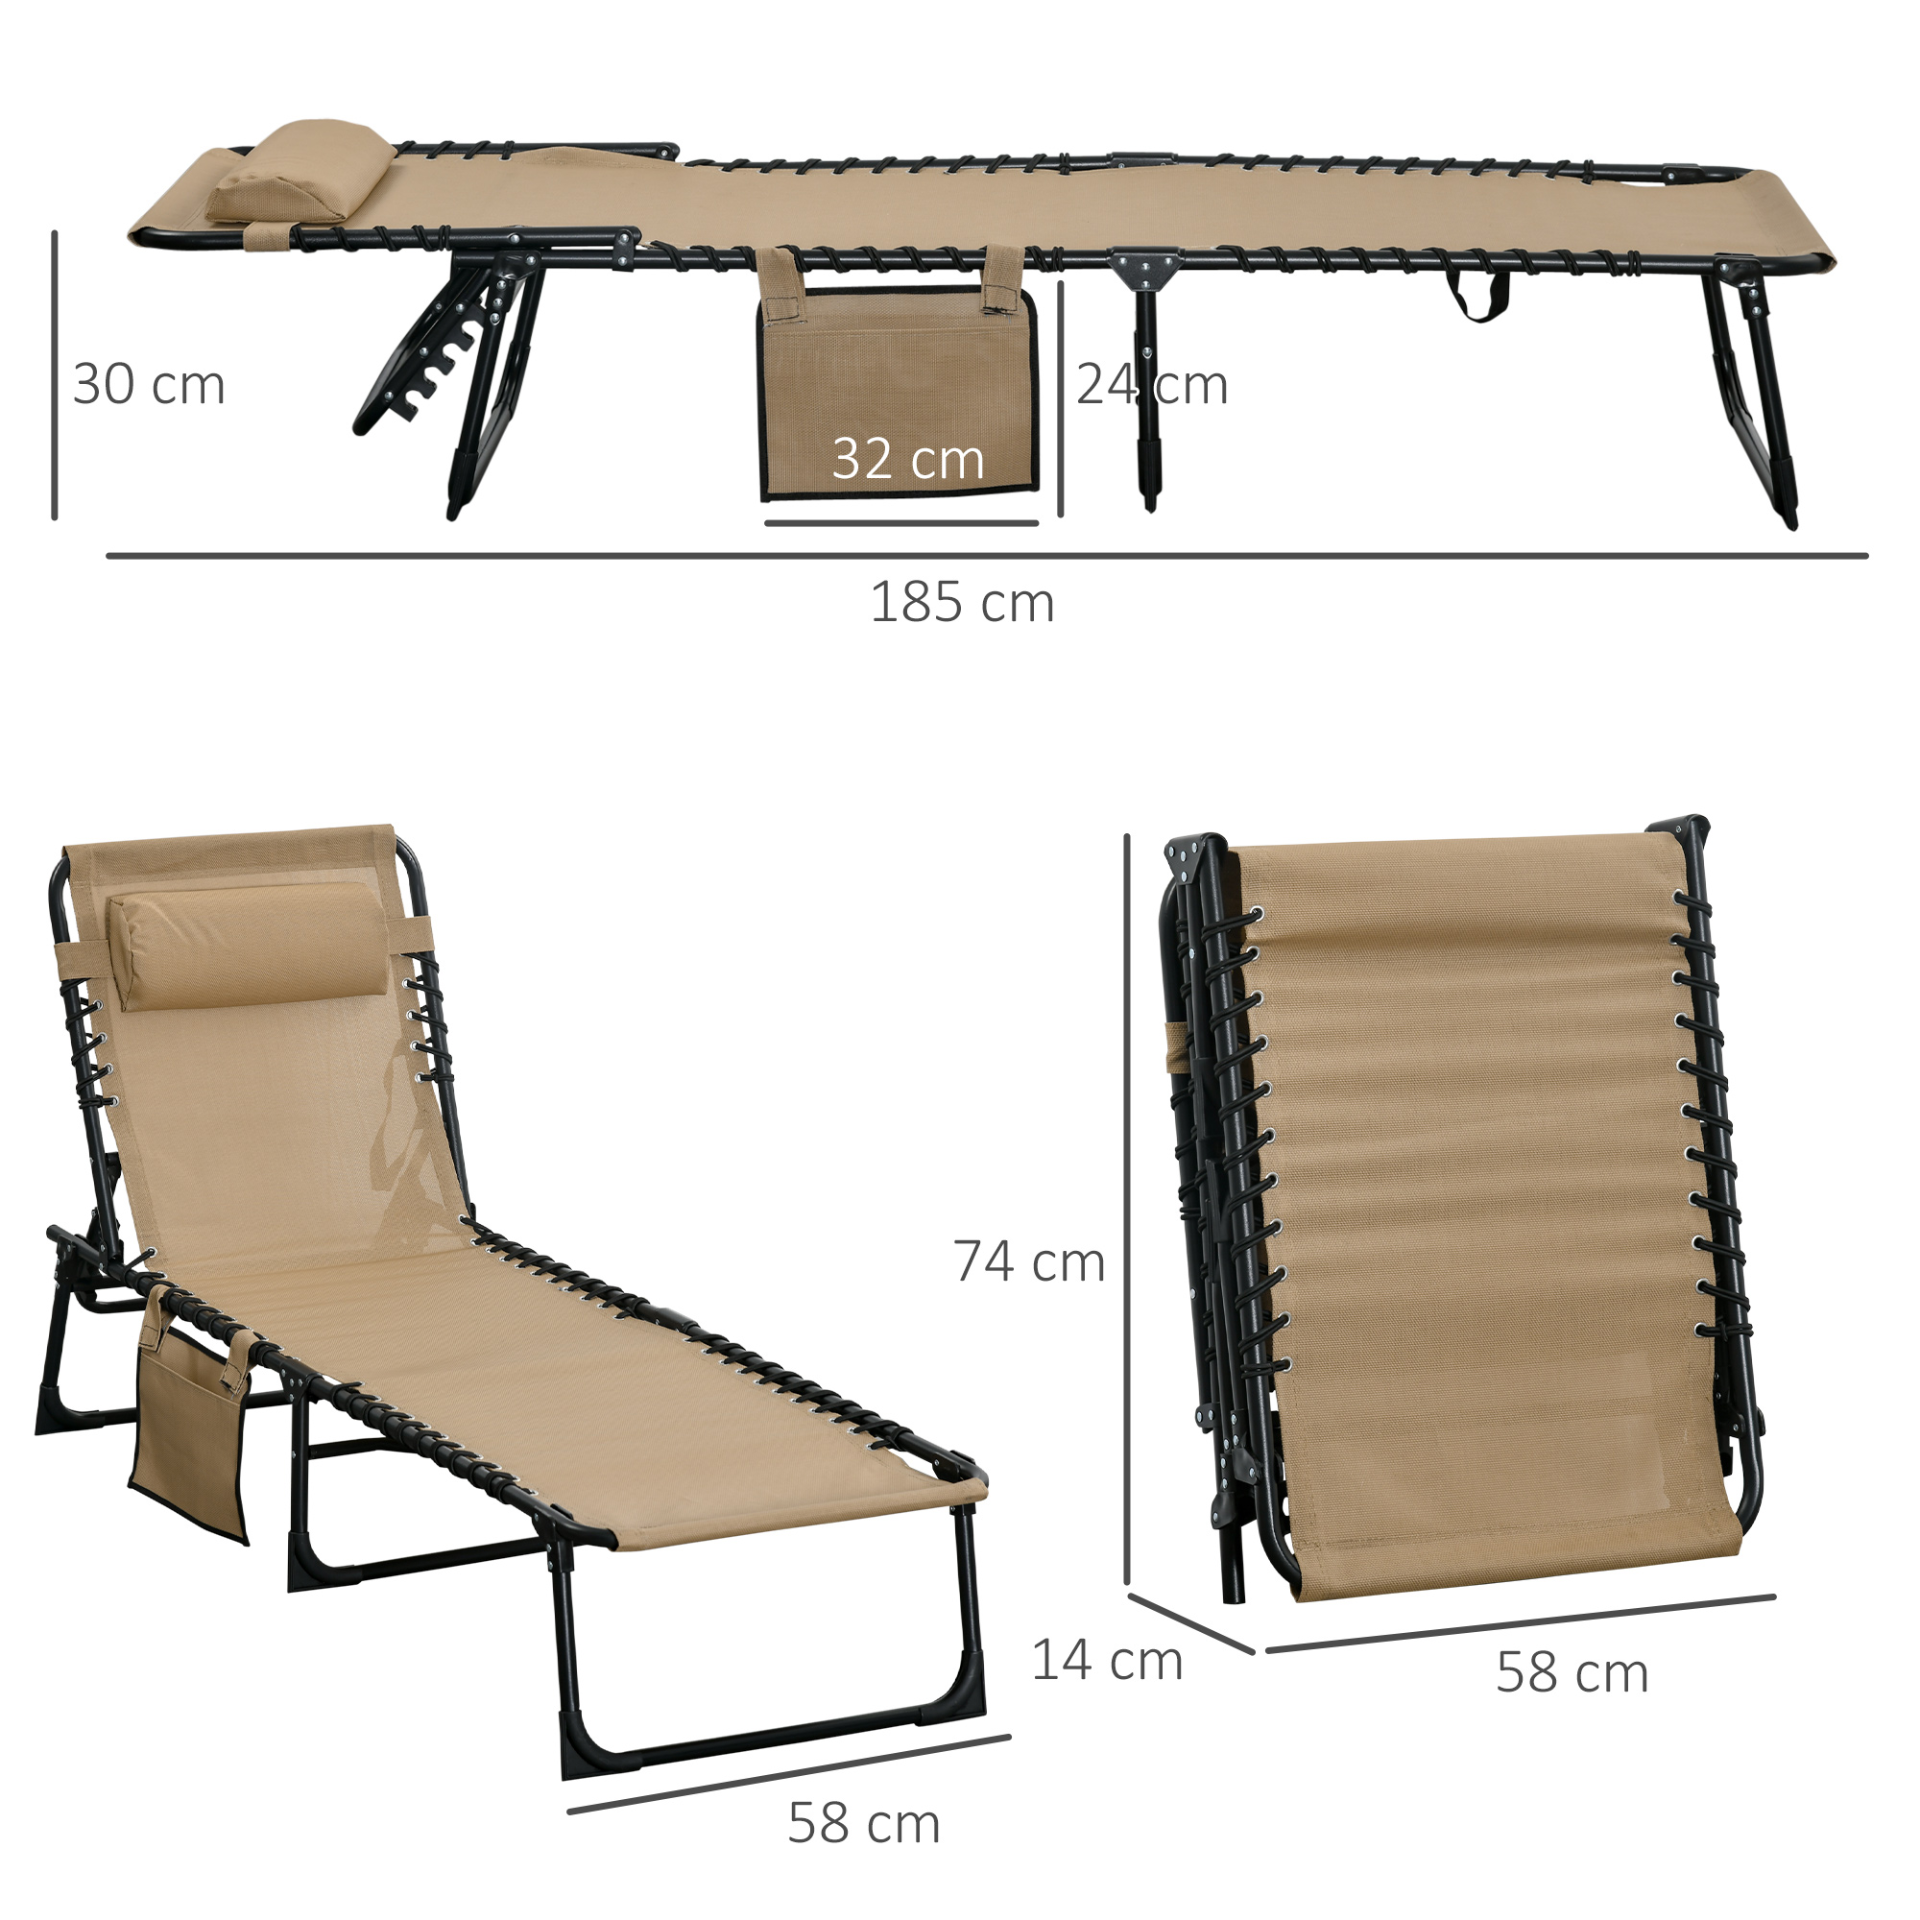 Outsunny Portable Sun Lounger, Folding Camping Bed Cot, Reclining Lounge Chair with Adjustable Backrest, Side Pocket, and Pillow - Beige Camping Chair Cosy Camping Co.   